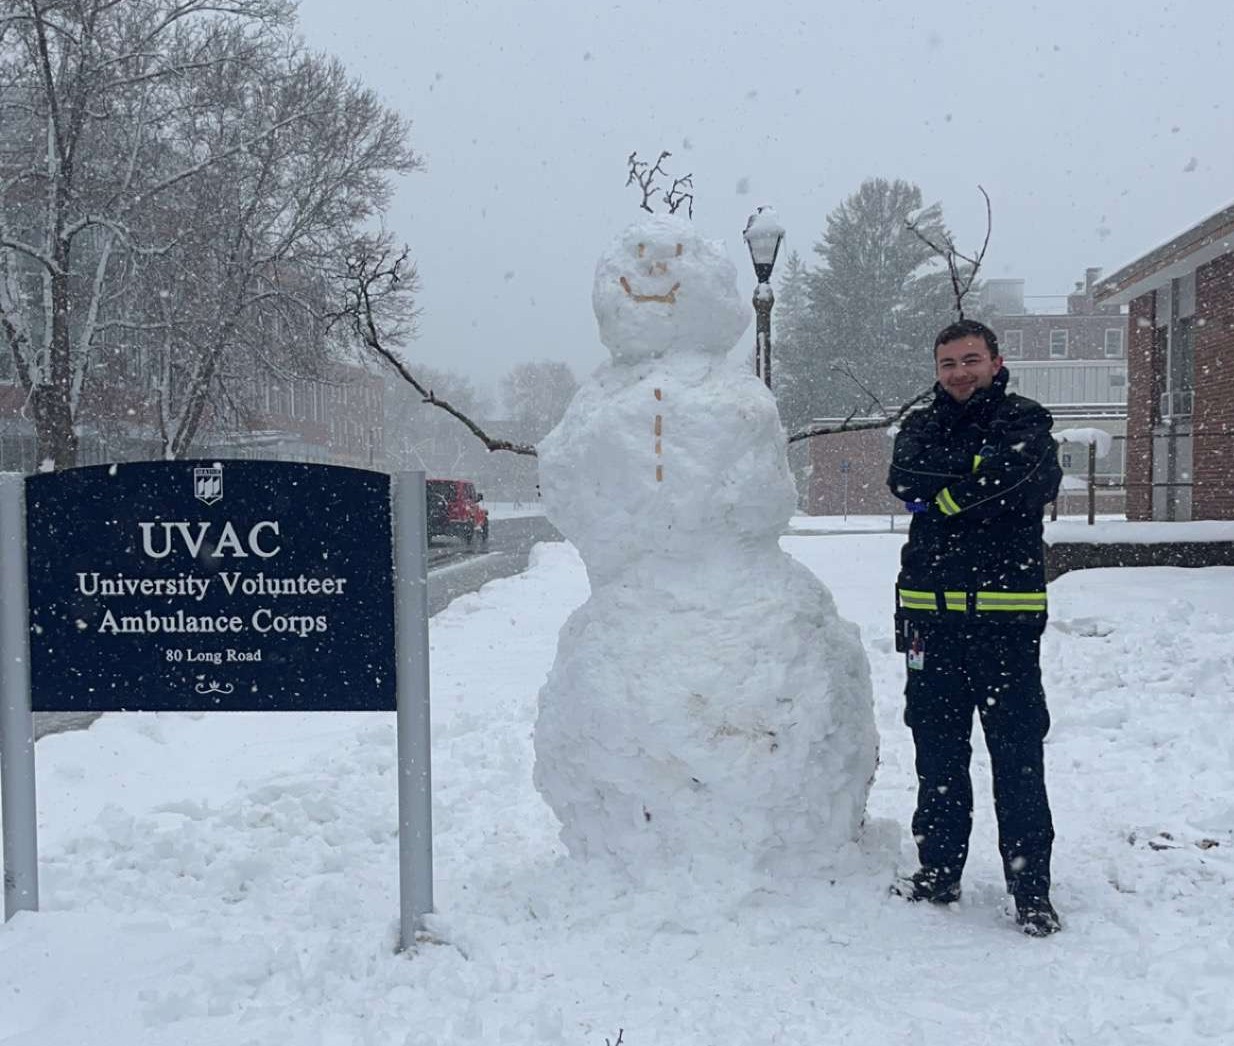 A UVAC member proudly stands beside a tall snowman next to the UVAC sign.